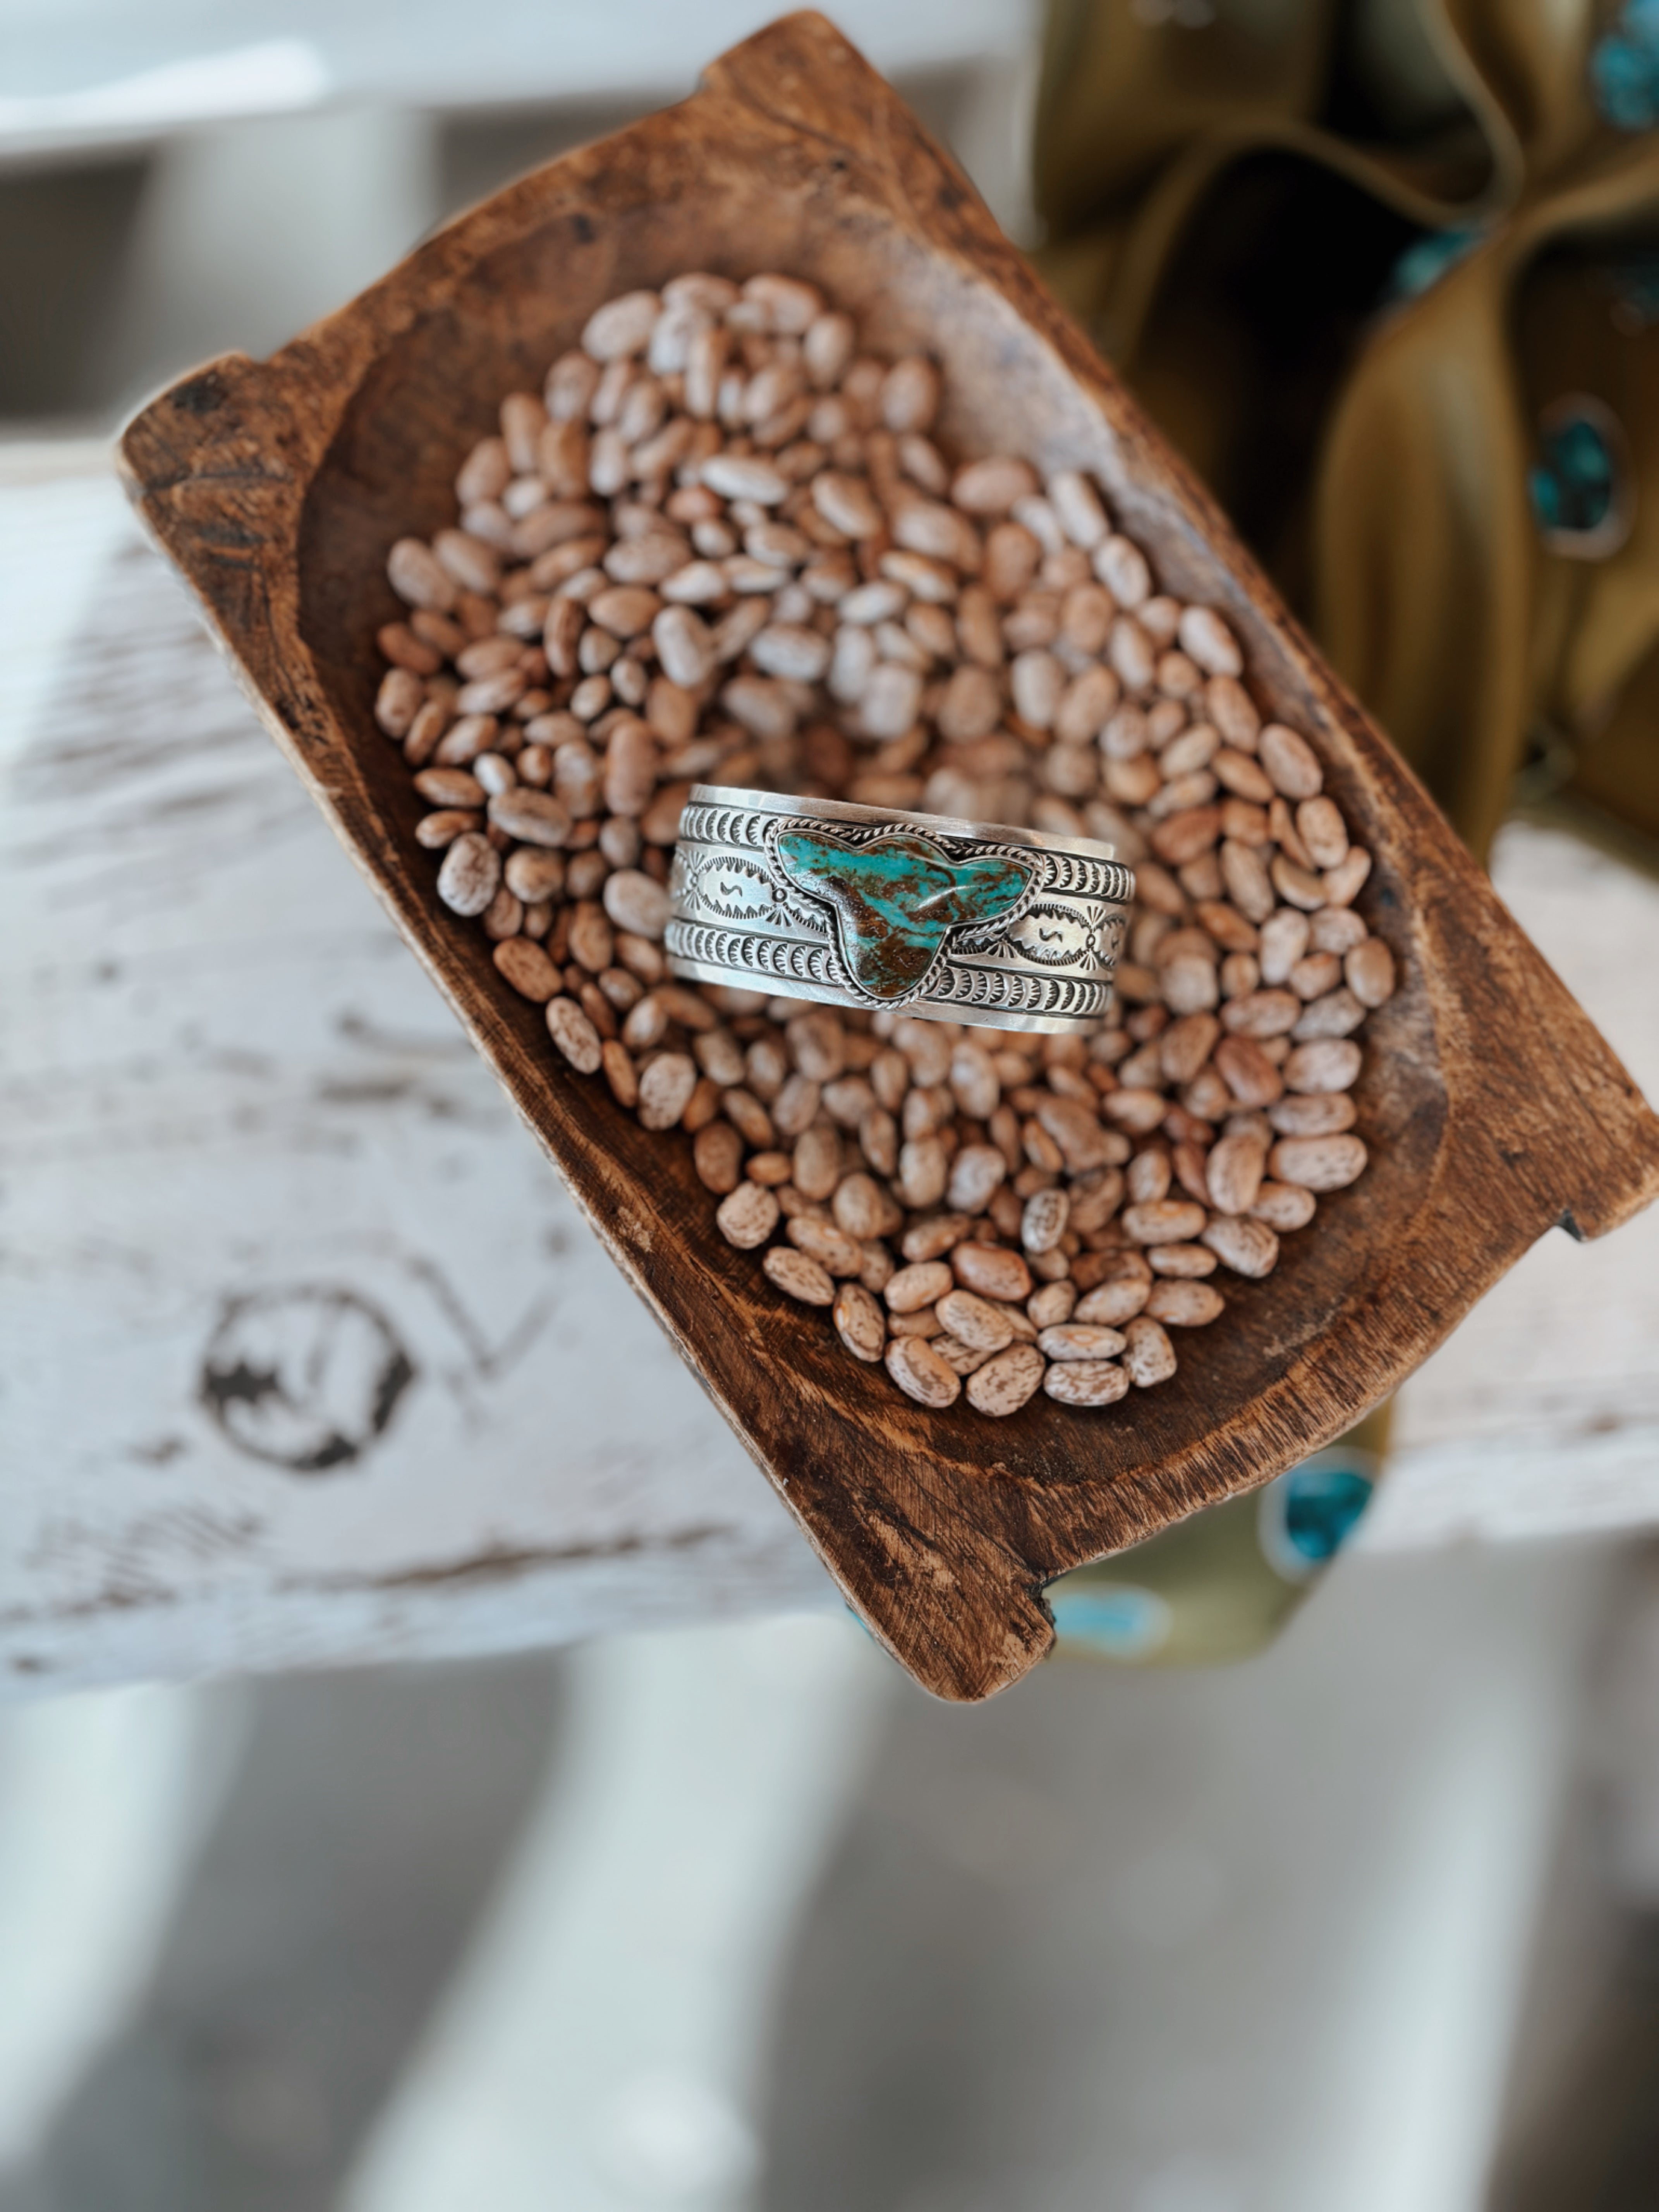 Turquoise Cow Cuff